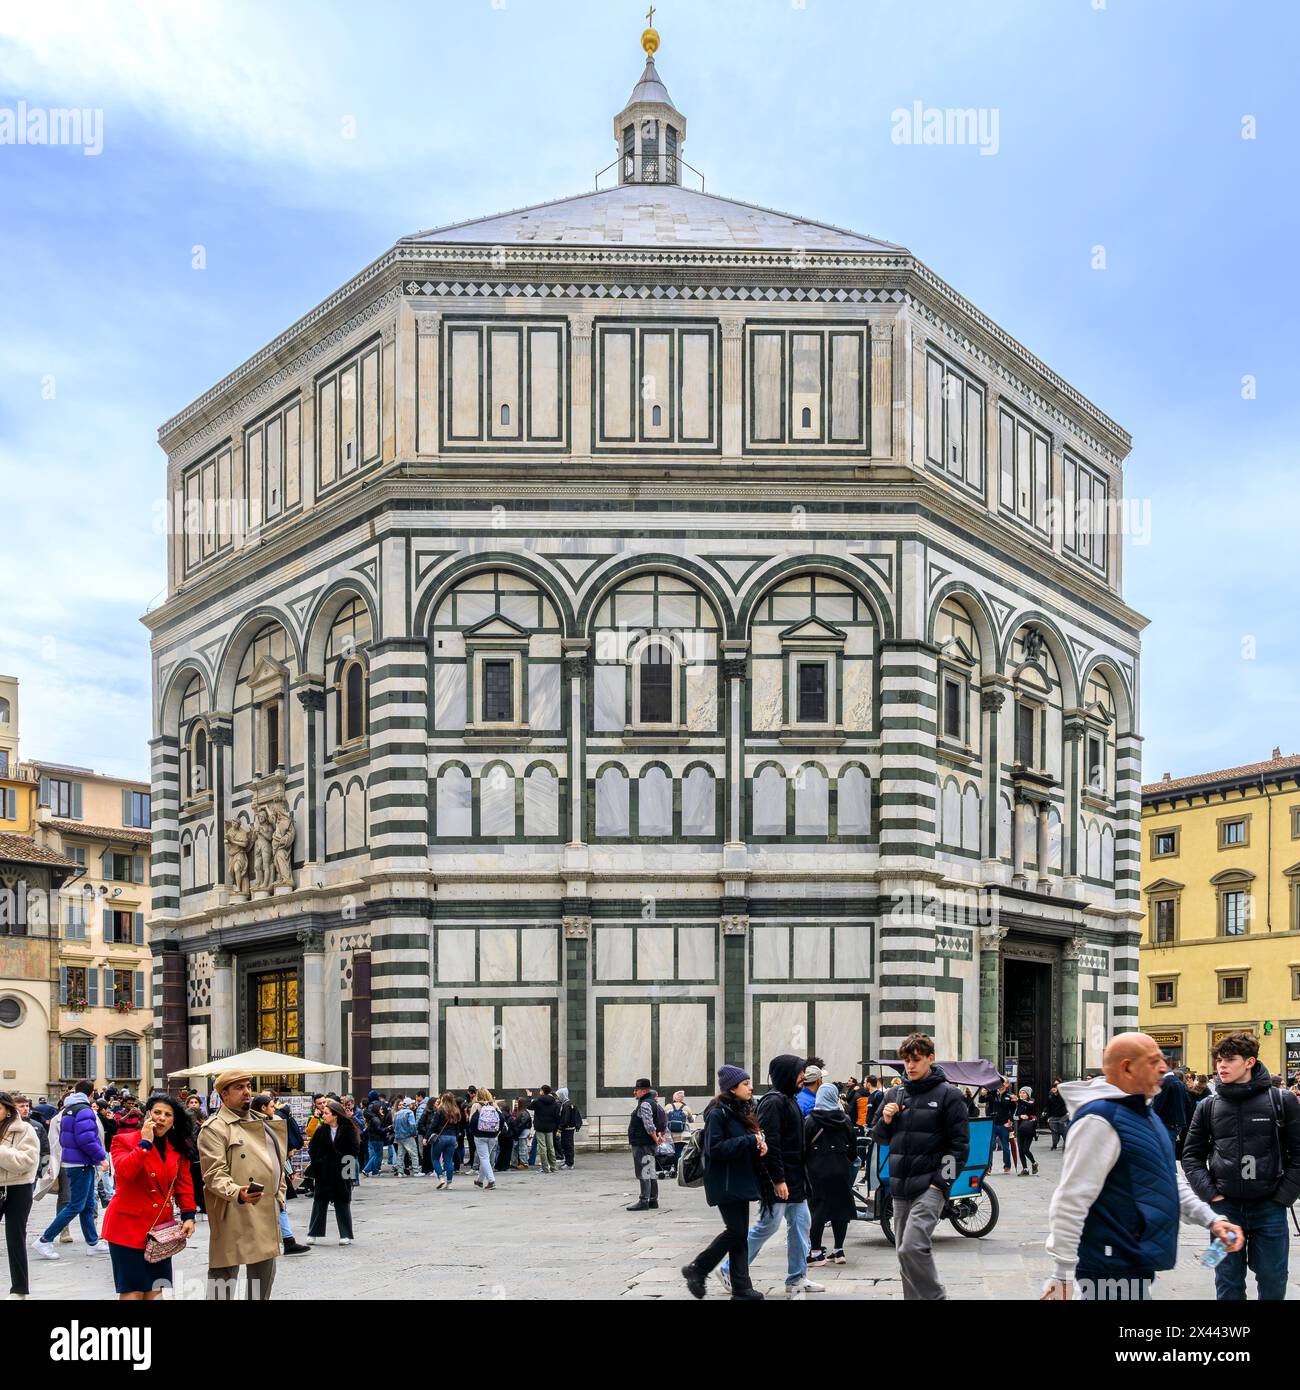 Octagonal Baptistery of St. John (Battistero di San Giovanni) opposite the Cathedral of Santa Maria del Fiore - the most iconic buildings in Florence. Stock Photo